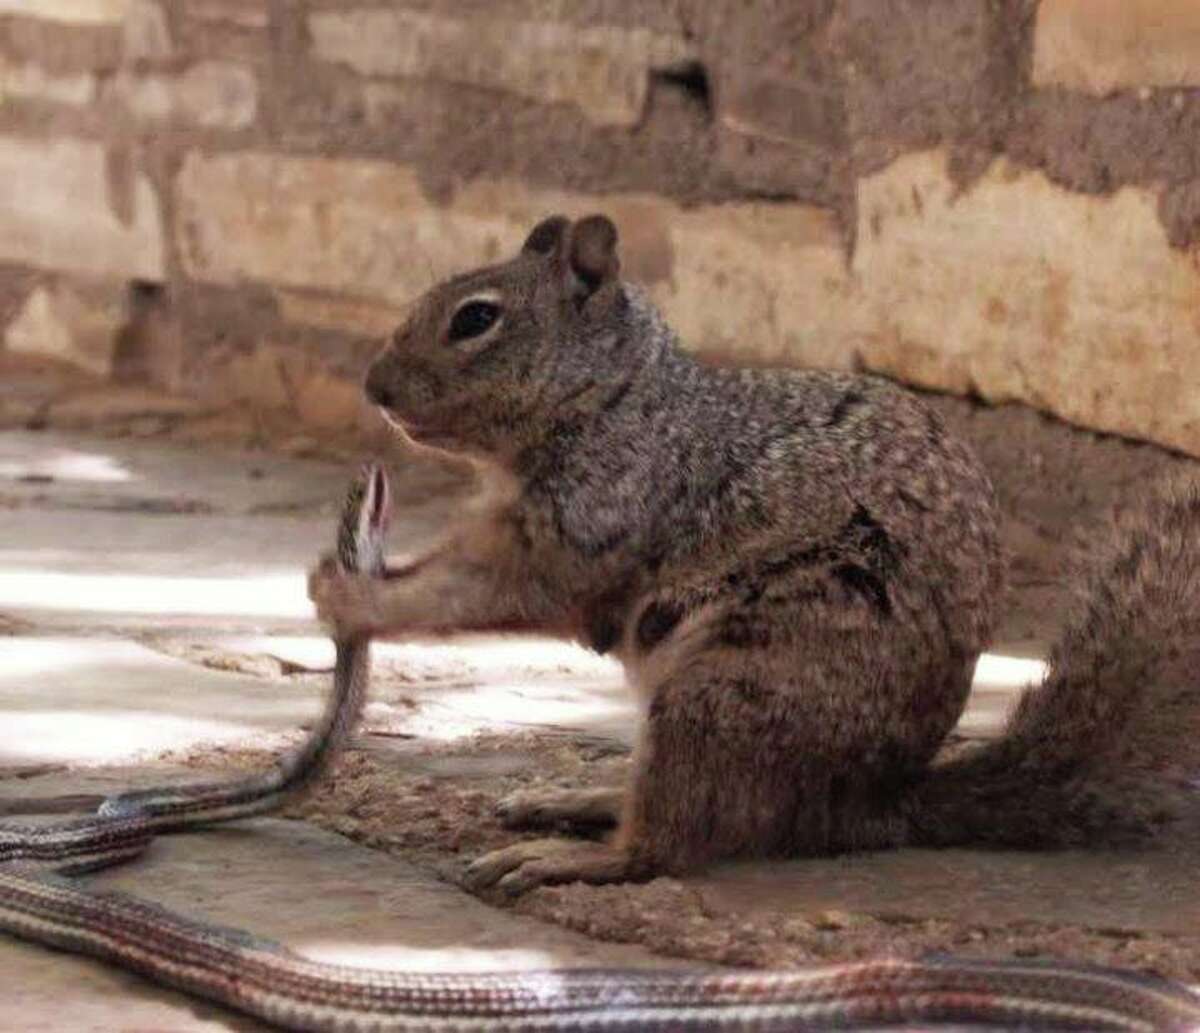 This photo, taken by the Guadalupe Mountains National Park, shows a squirrel holding a squirrel just before devouring it. According to a Facebook post, the squirrel ate most of the snake, "bones and all."